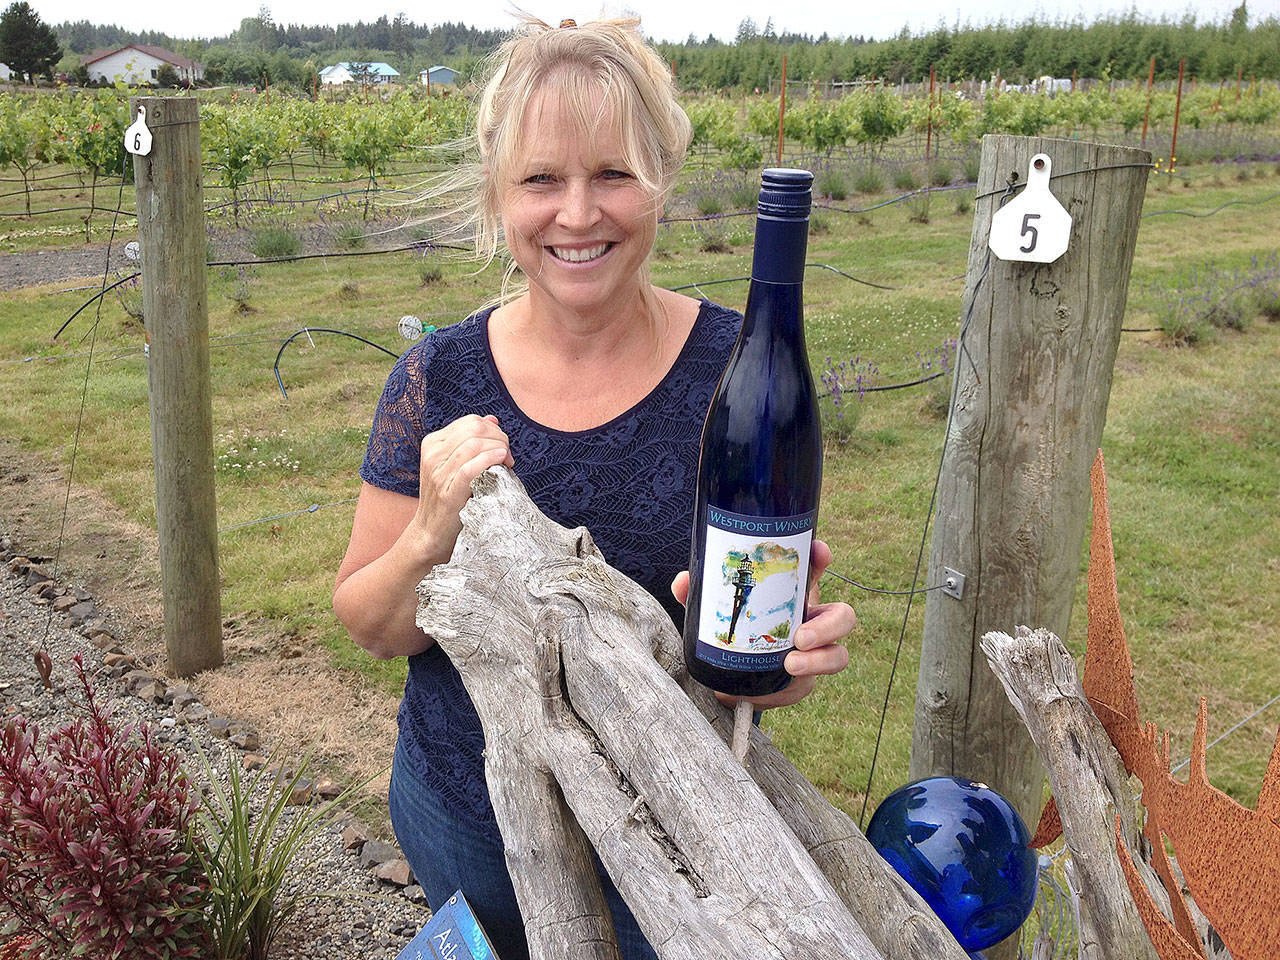 Kim Roberts, who co-founded Westport Winery Garden Resort in 2008 with her husband, Blain, used some of her family’s Riesling to help produce hand sanitizer for law enforcement and first responders in and around Grays Harbor County. (Eric Degerman/Great Northwest Wine)